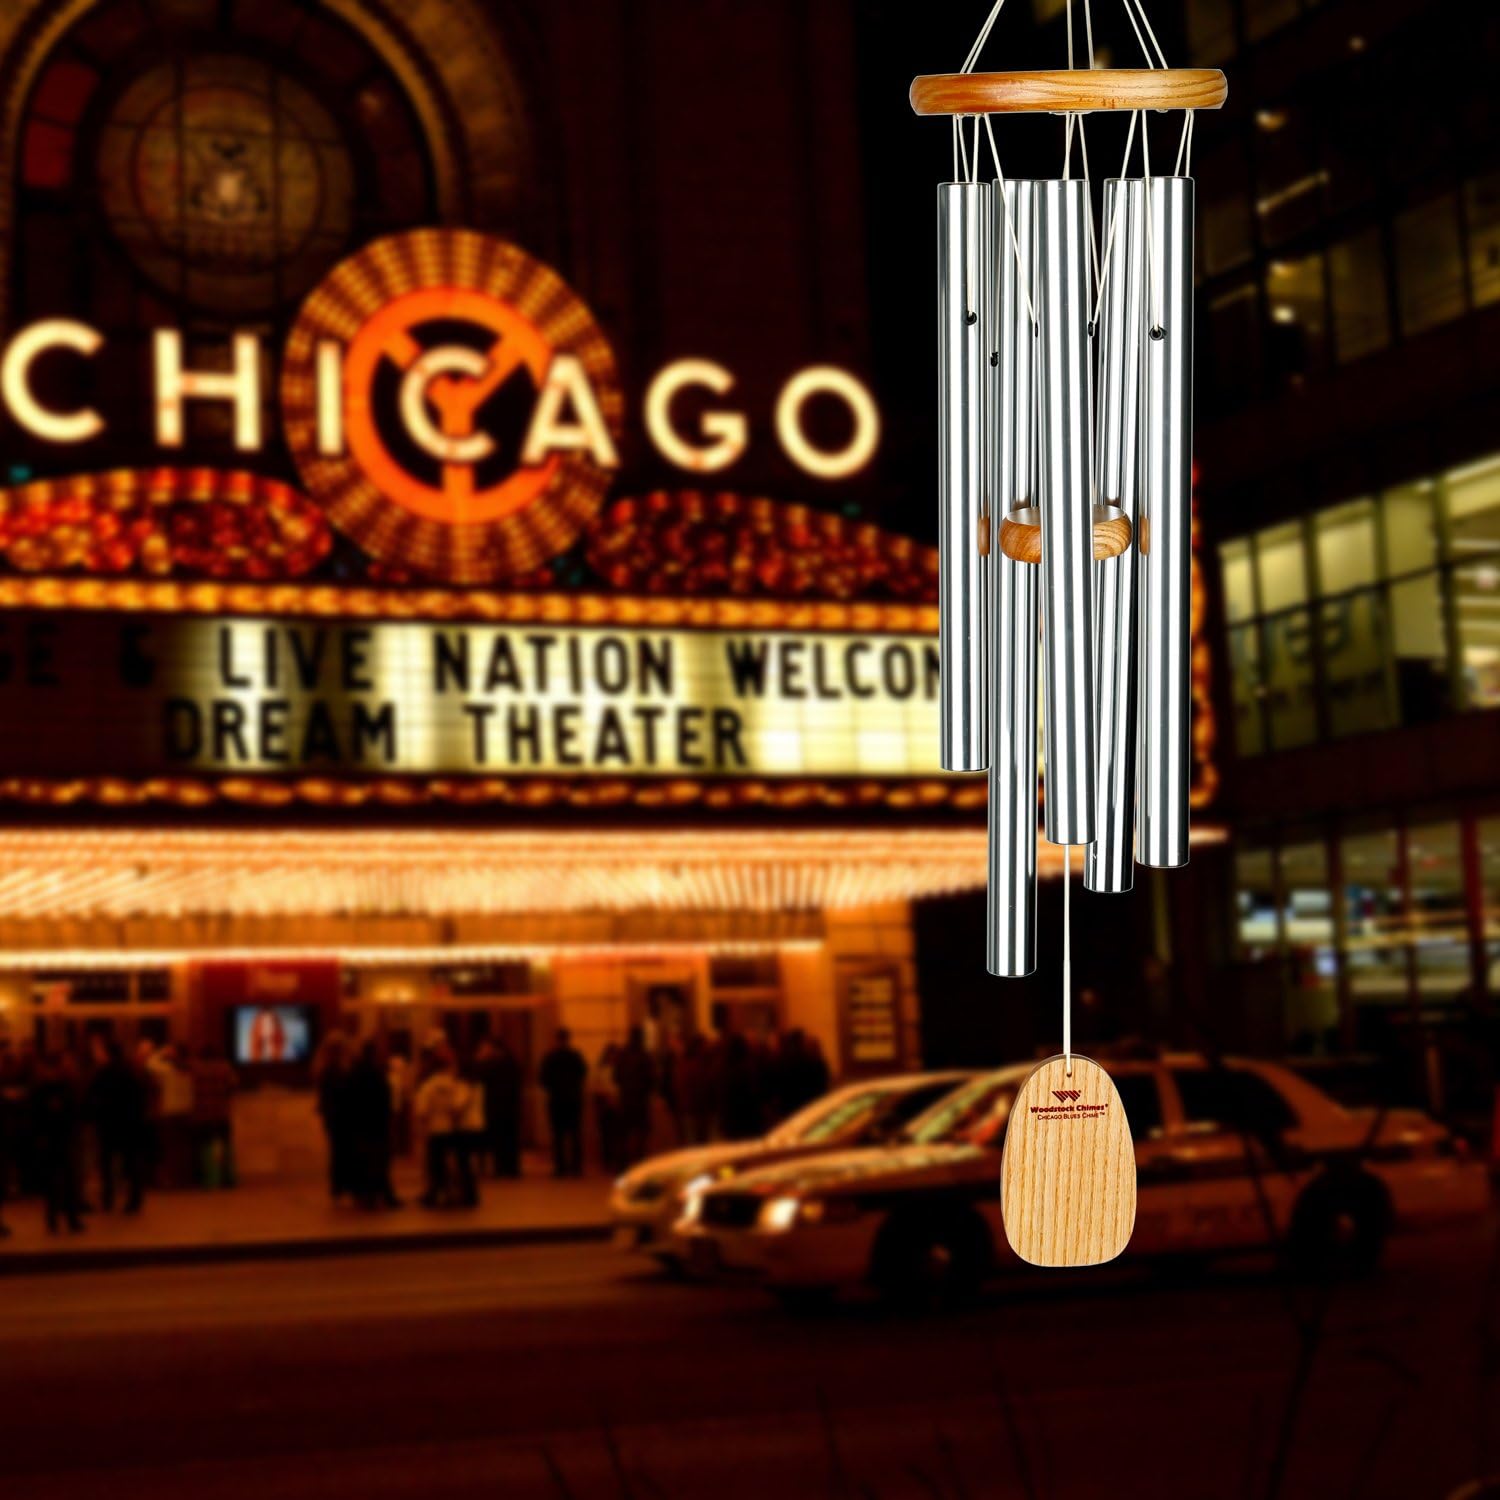 Woodstock Chimes Signature Collection, Chicago Blues Chime, 25''-hotRAGS.com